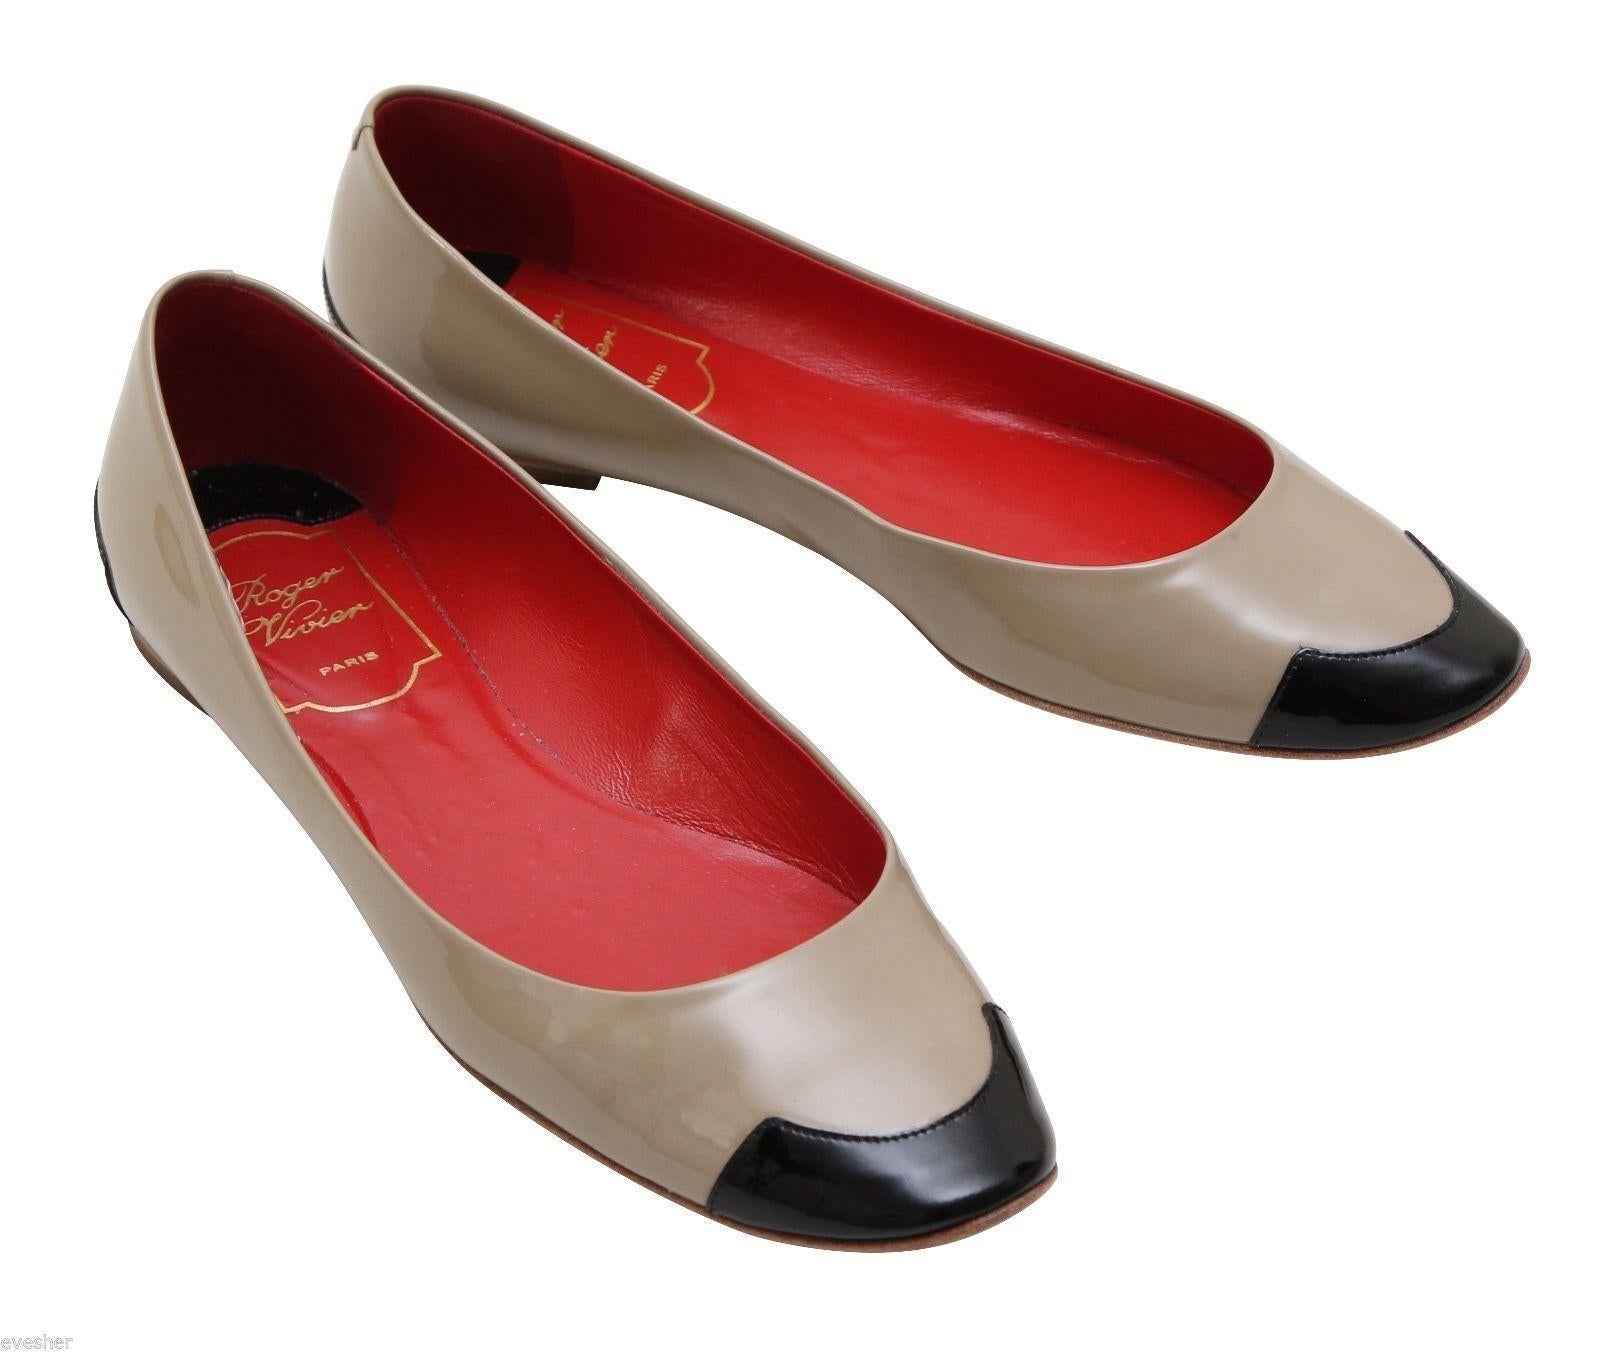 Brown ROGER VIVIER Ballet Flat Heel Shoe Patent Leather Taupe Black HELLO COCO T.05 37 For Sale